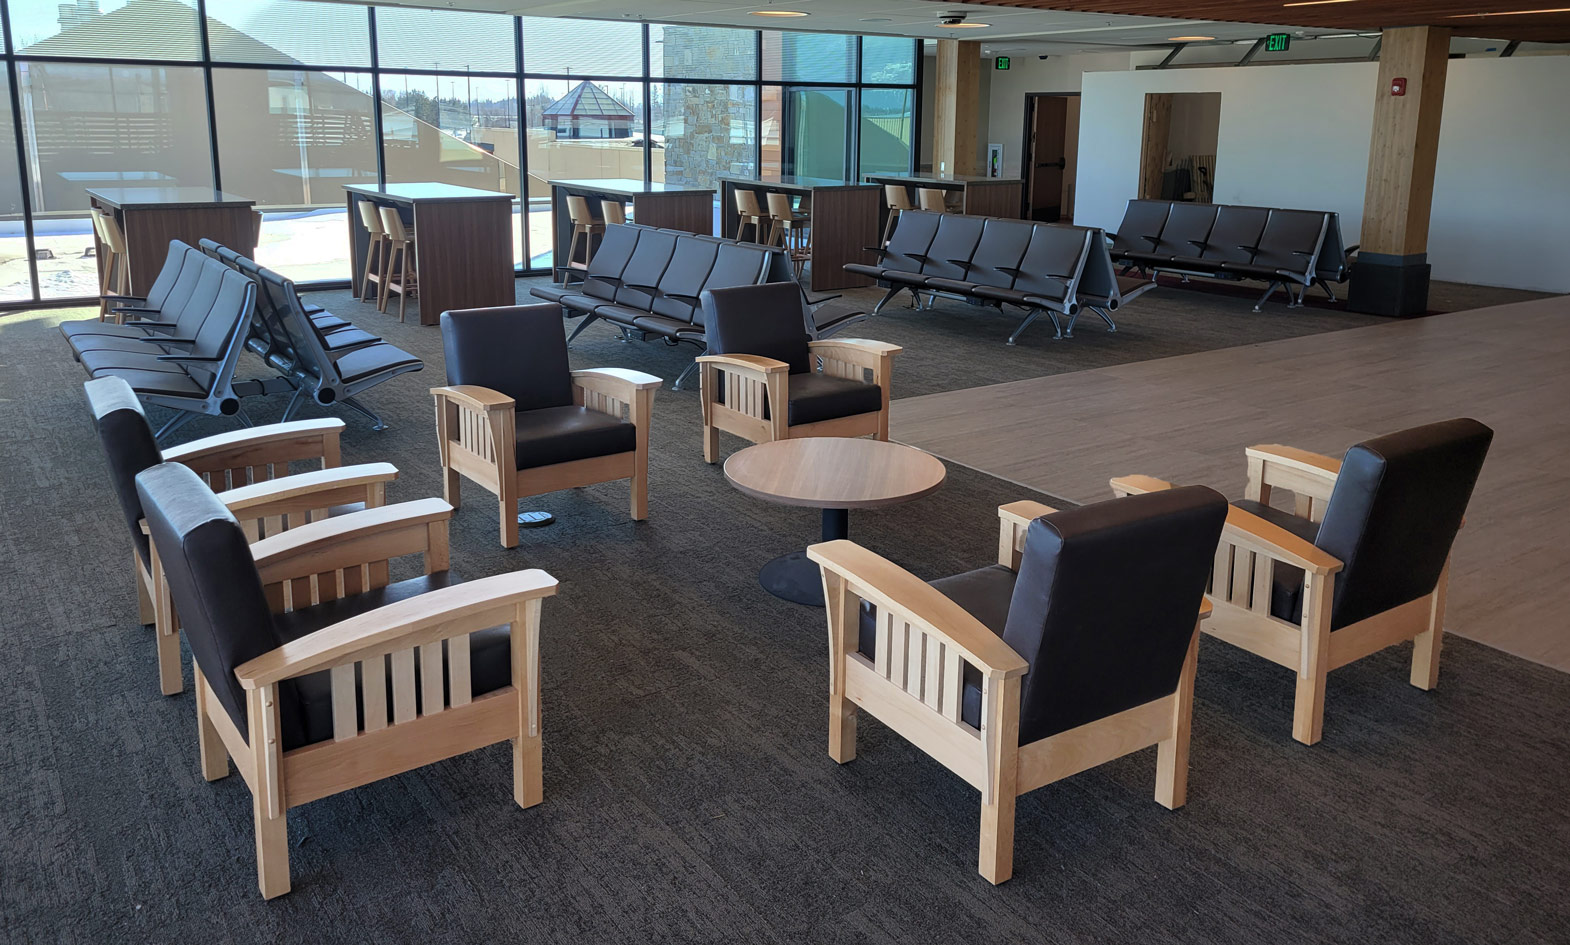 Arts and crafts style lounge chairs in airport